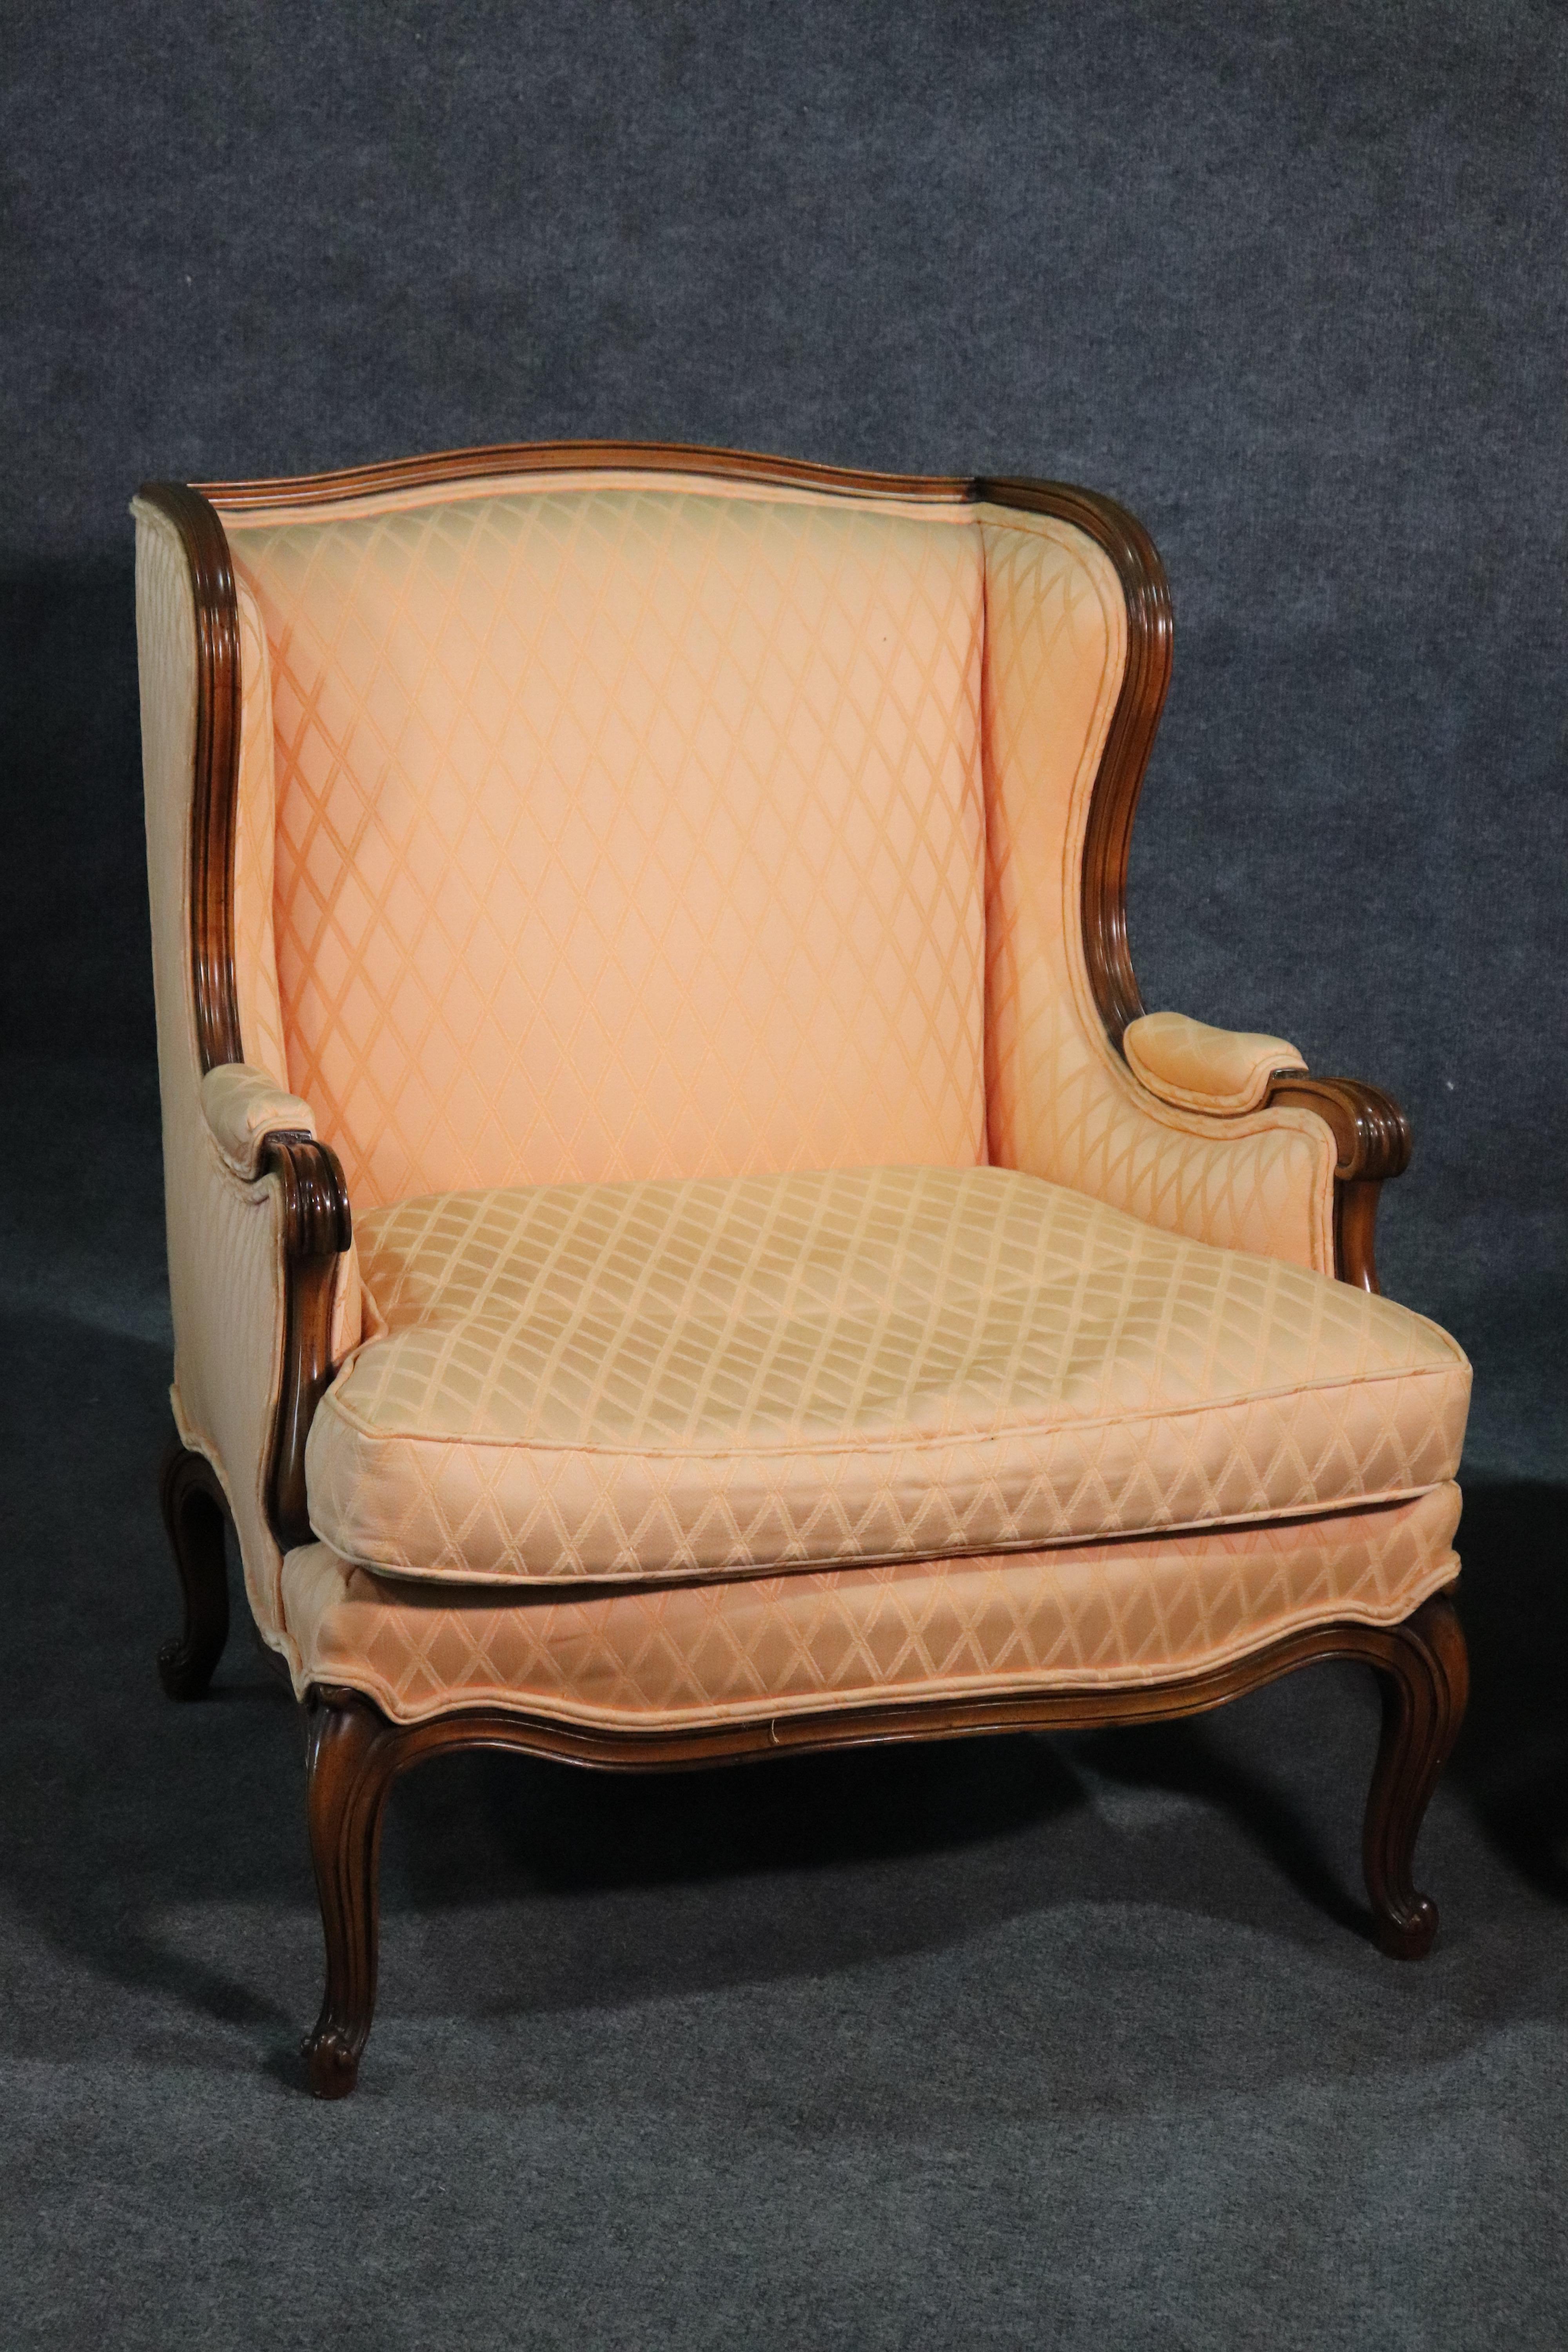 This is a clean pair of French bergere chairs with sophisticated lines. The chairs each measure 35 tall x 30 wide x 33 deep and the seat height is 18 inches.